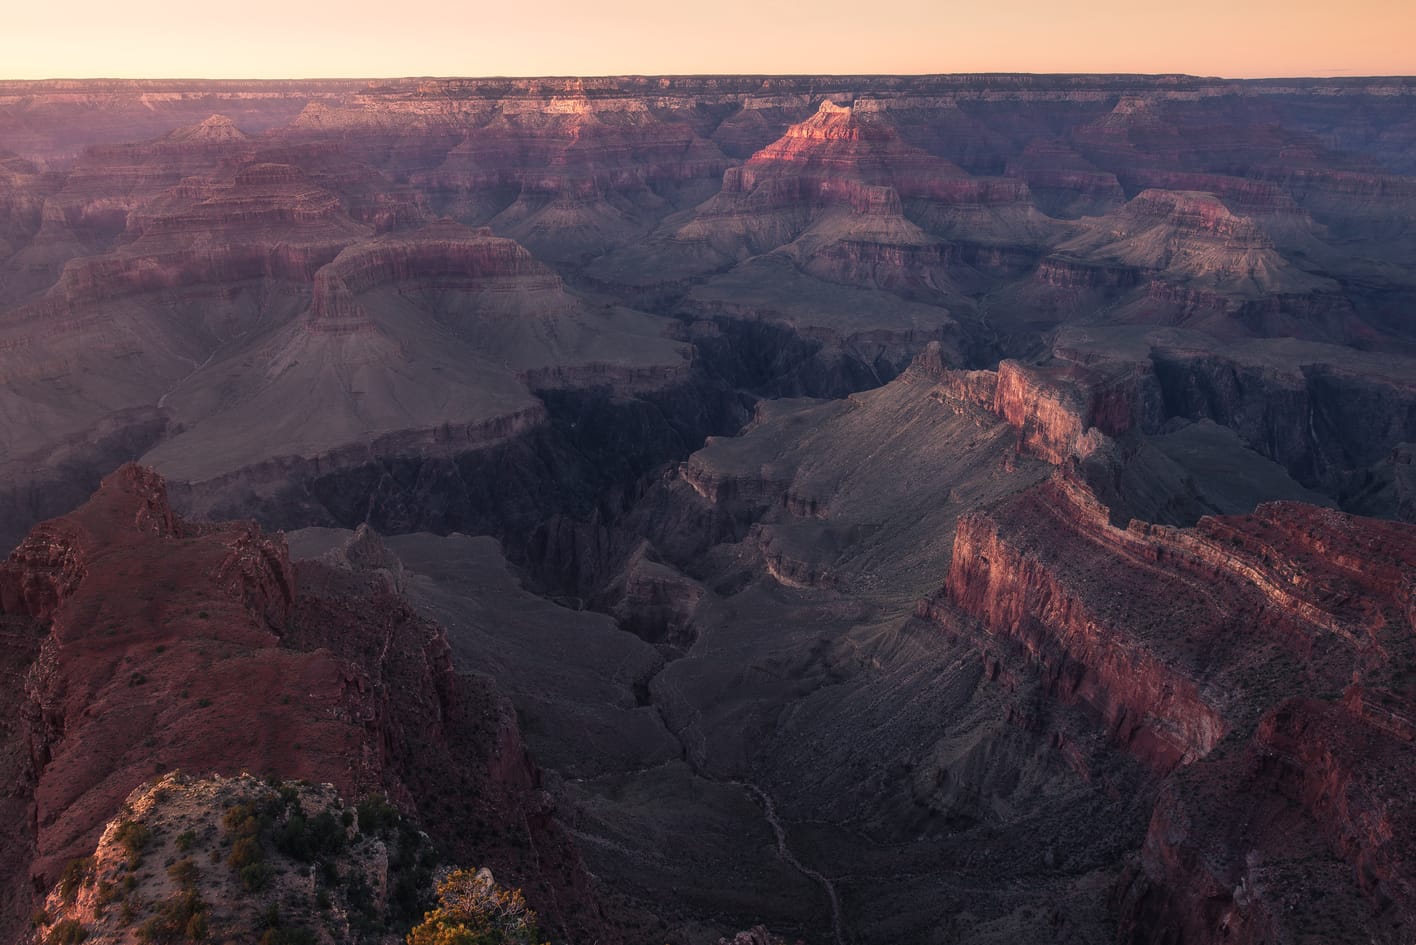 Where To Stay In The Grand Canyon - Hotels And Campgrounds